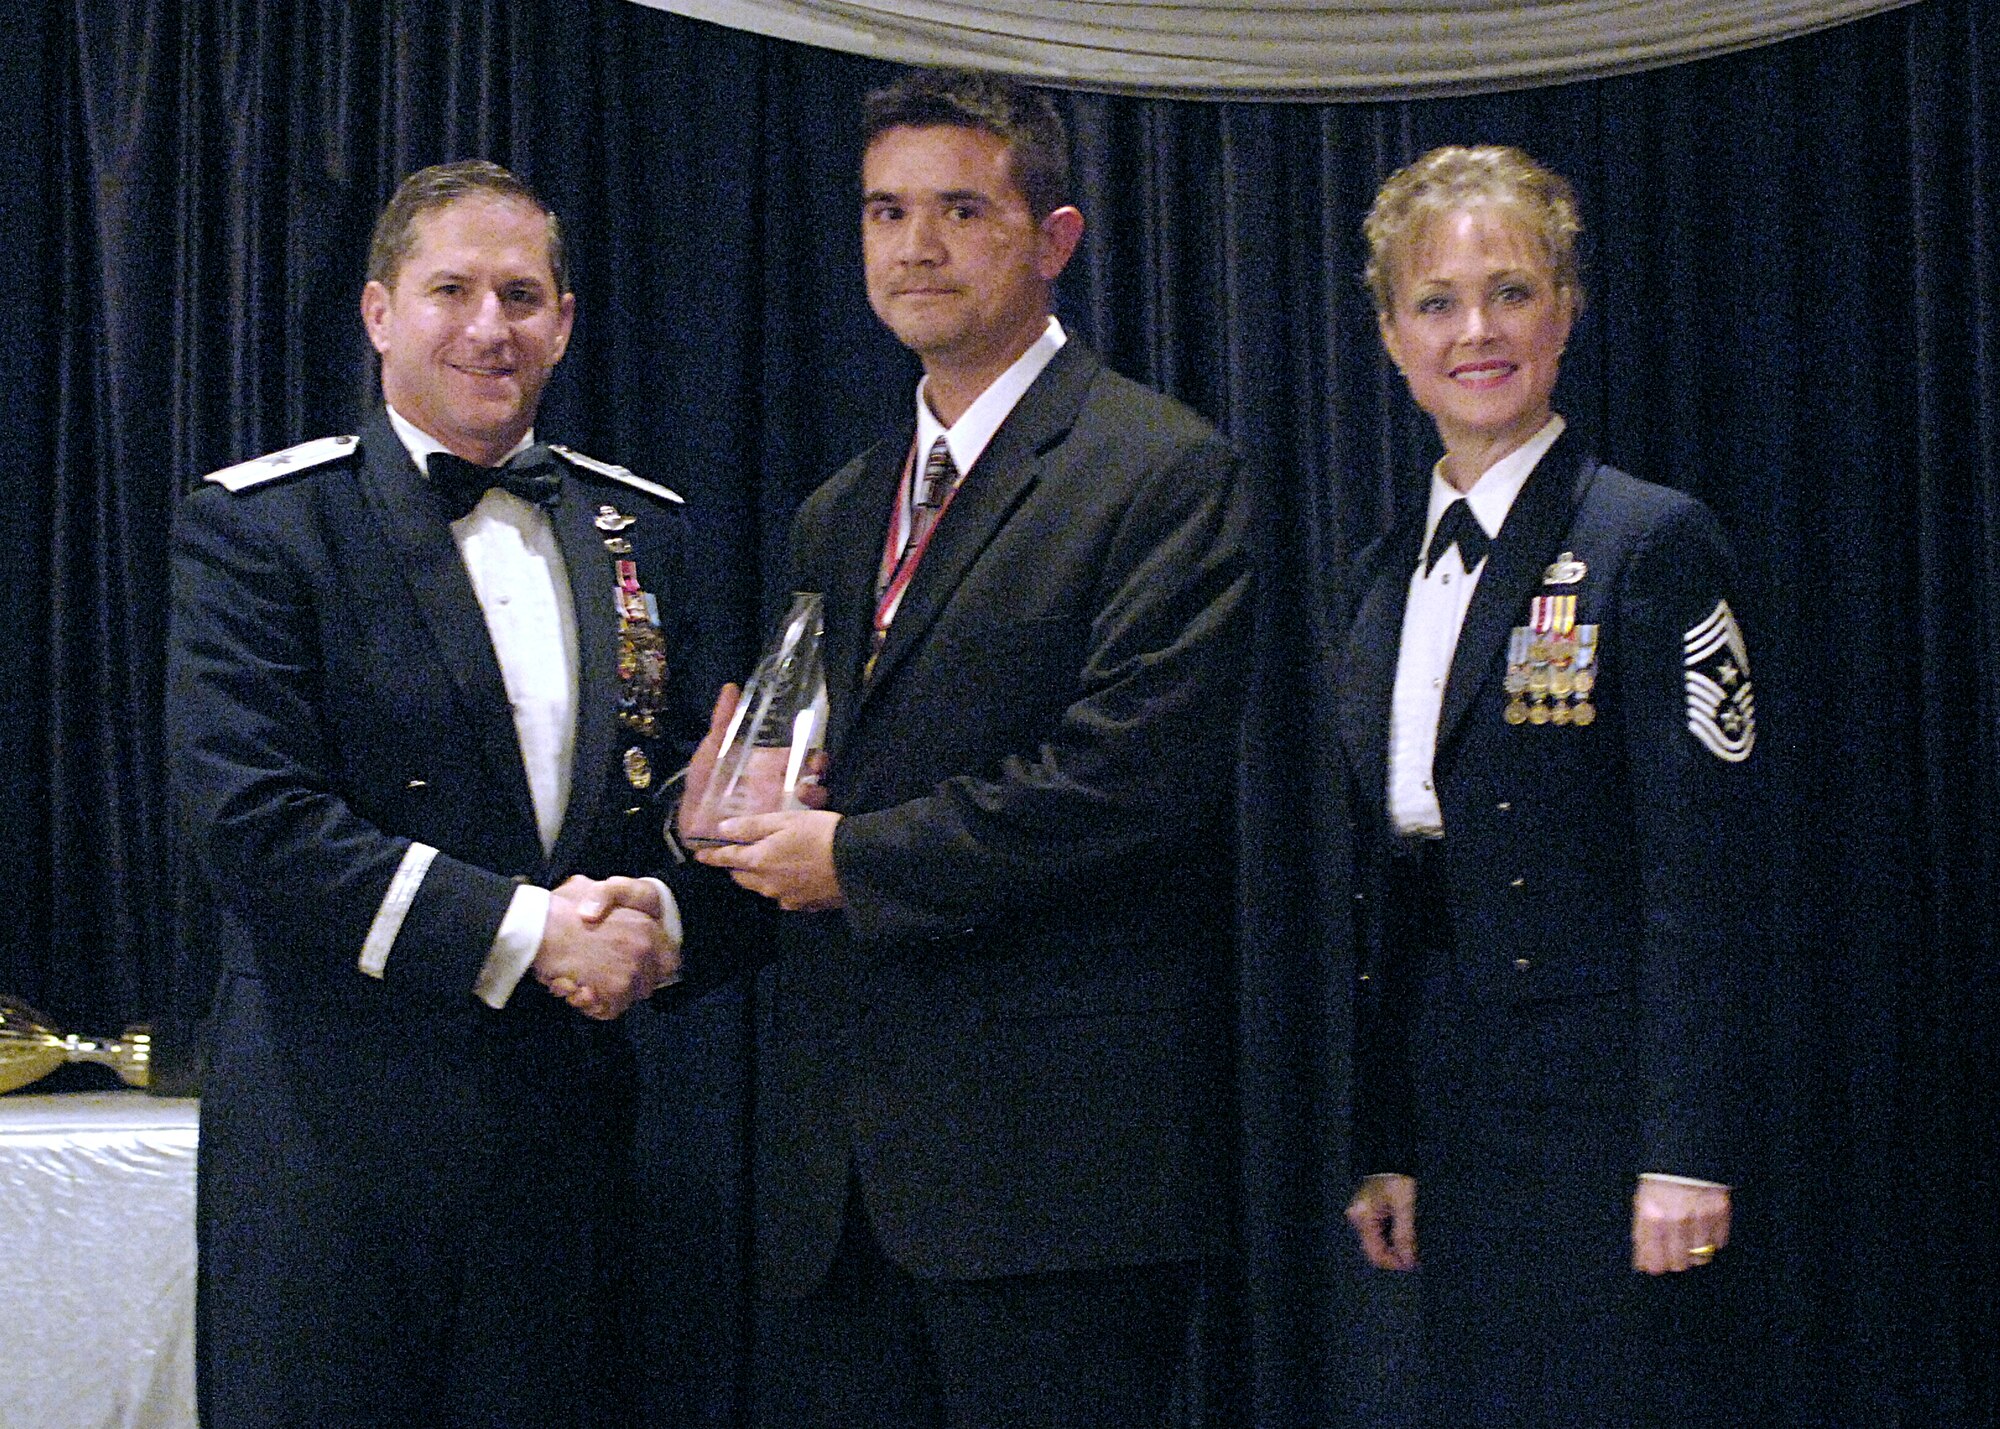 Civilian of the Year Category III, Mr. Edward Morse, 49th Operations Support Squadron.